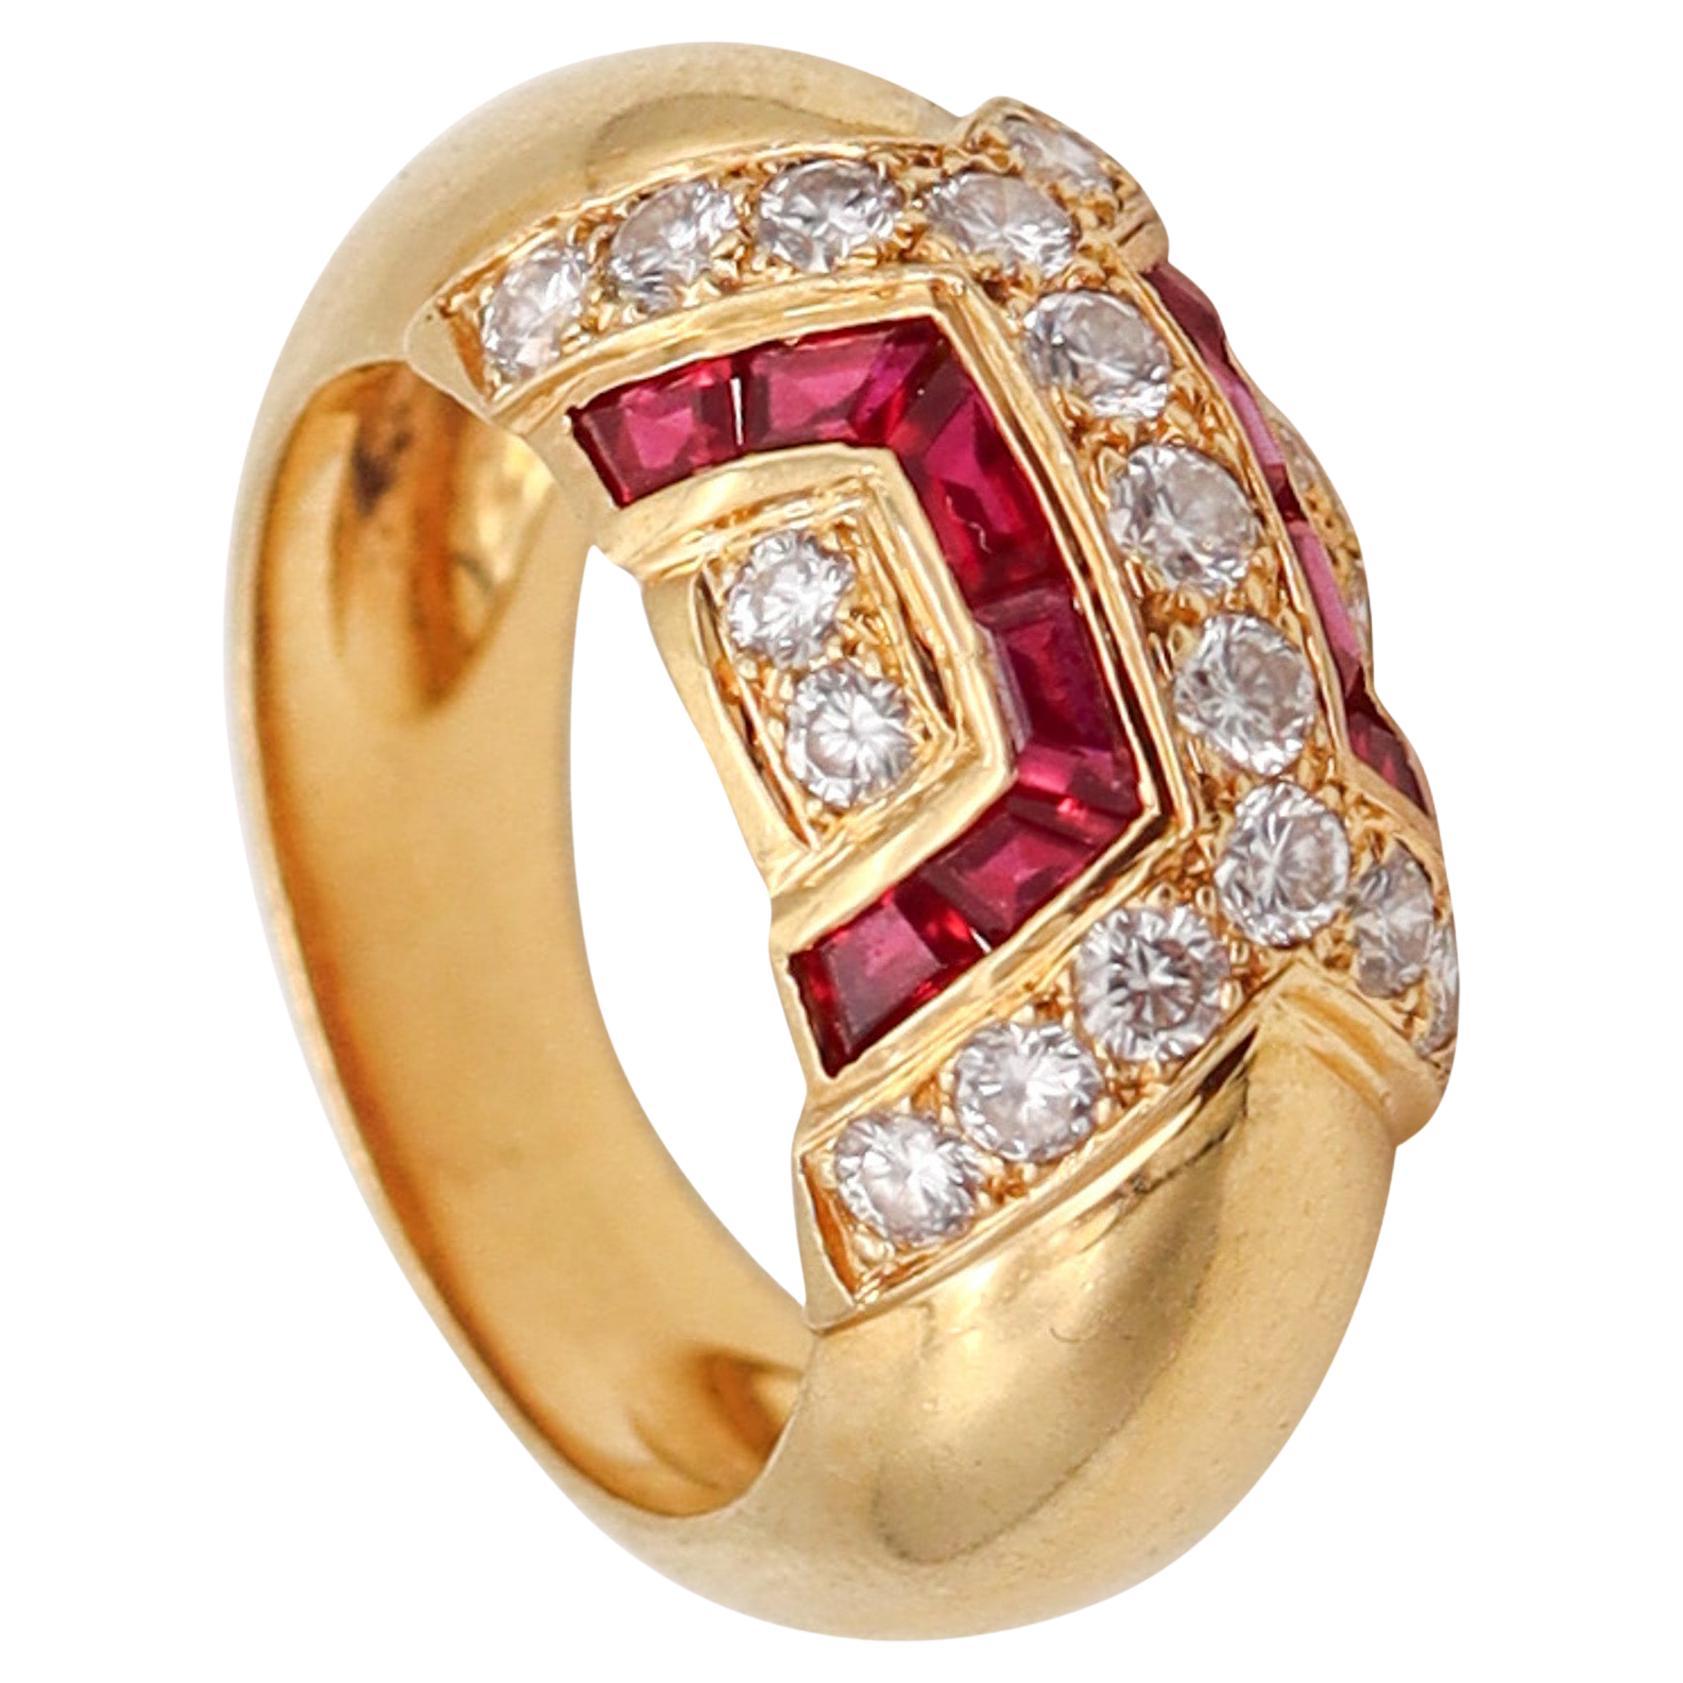 Boucheron Paris Modernist Ring In 18Kt Gold With 1.94 Ctw In Diamonds And Rubies For Sale